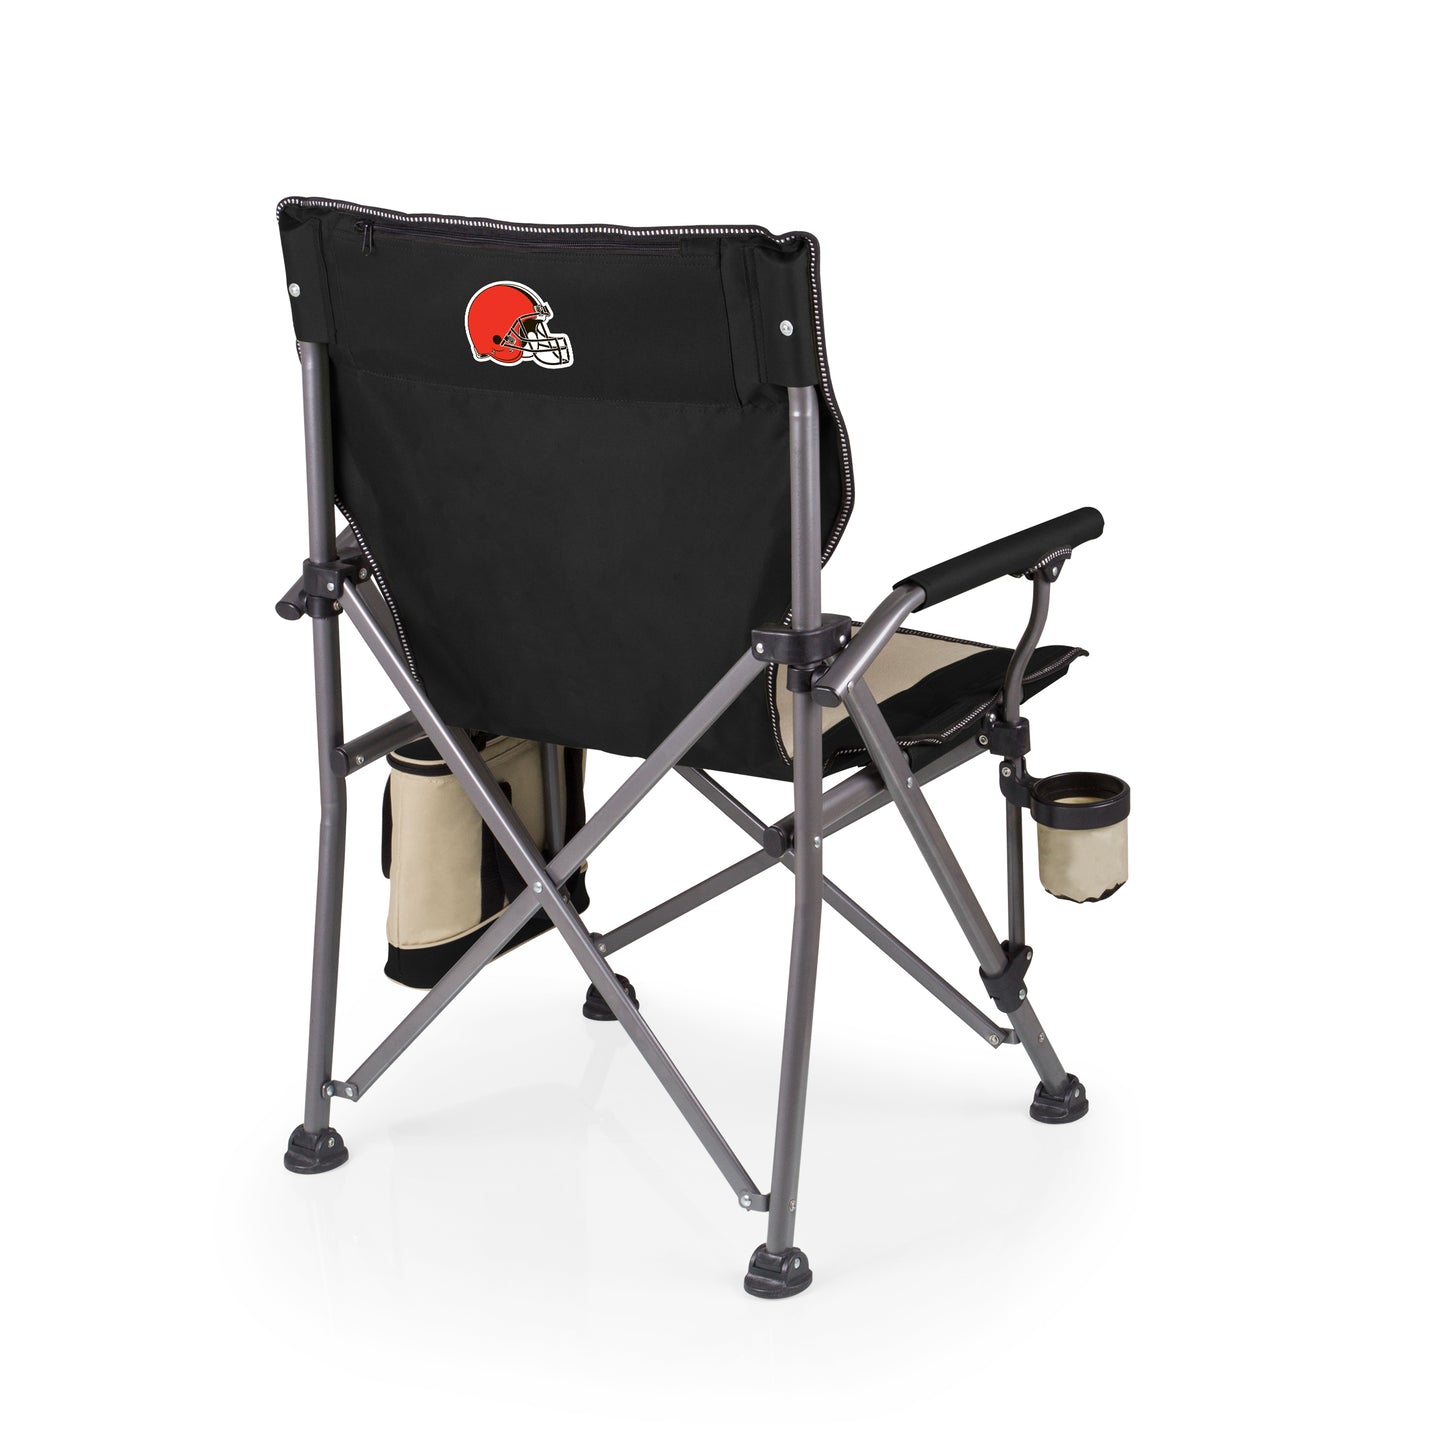 Cleveland Browns - Outlander Folding Camping Chair with Cooler